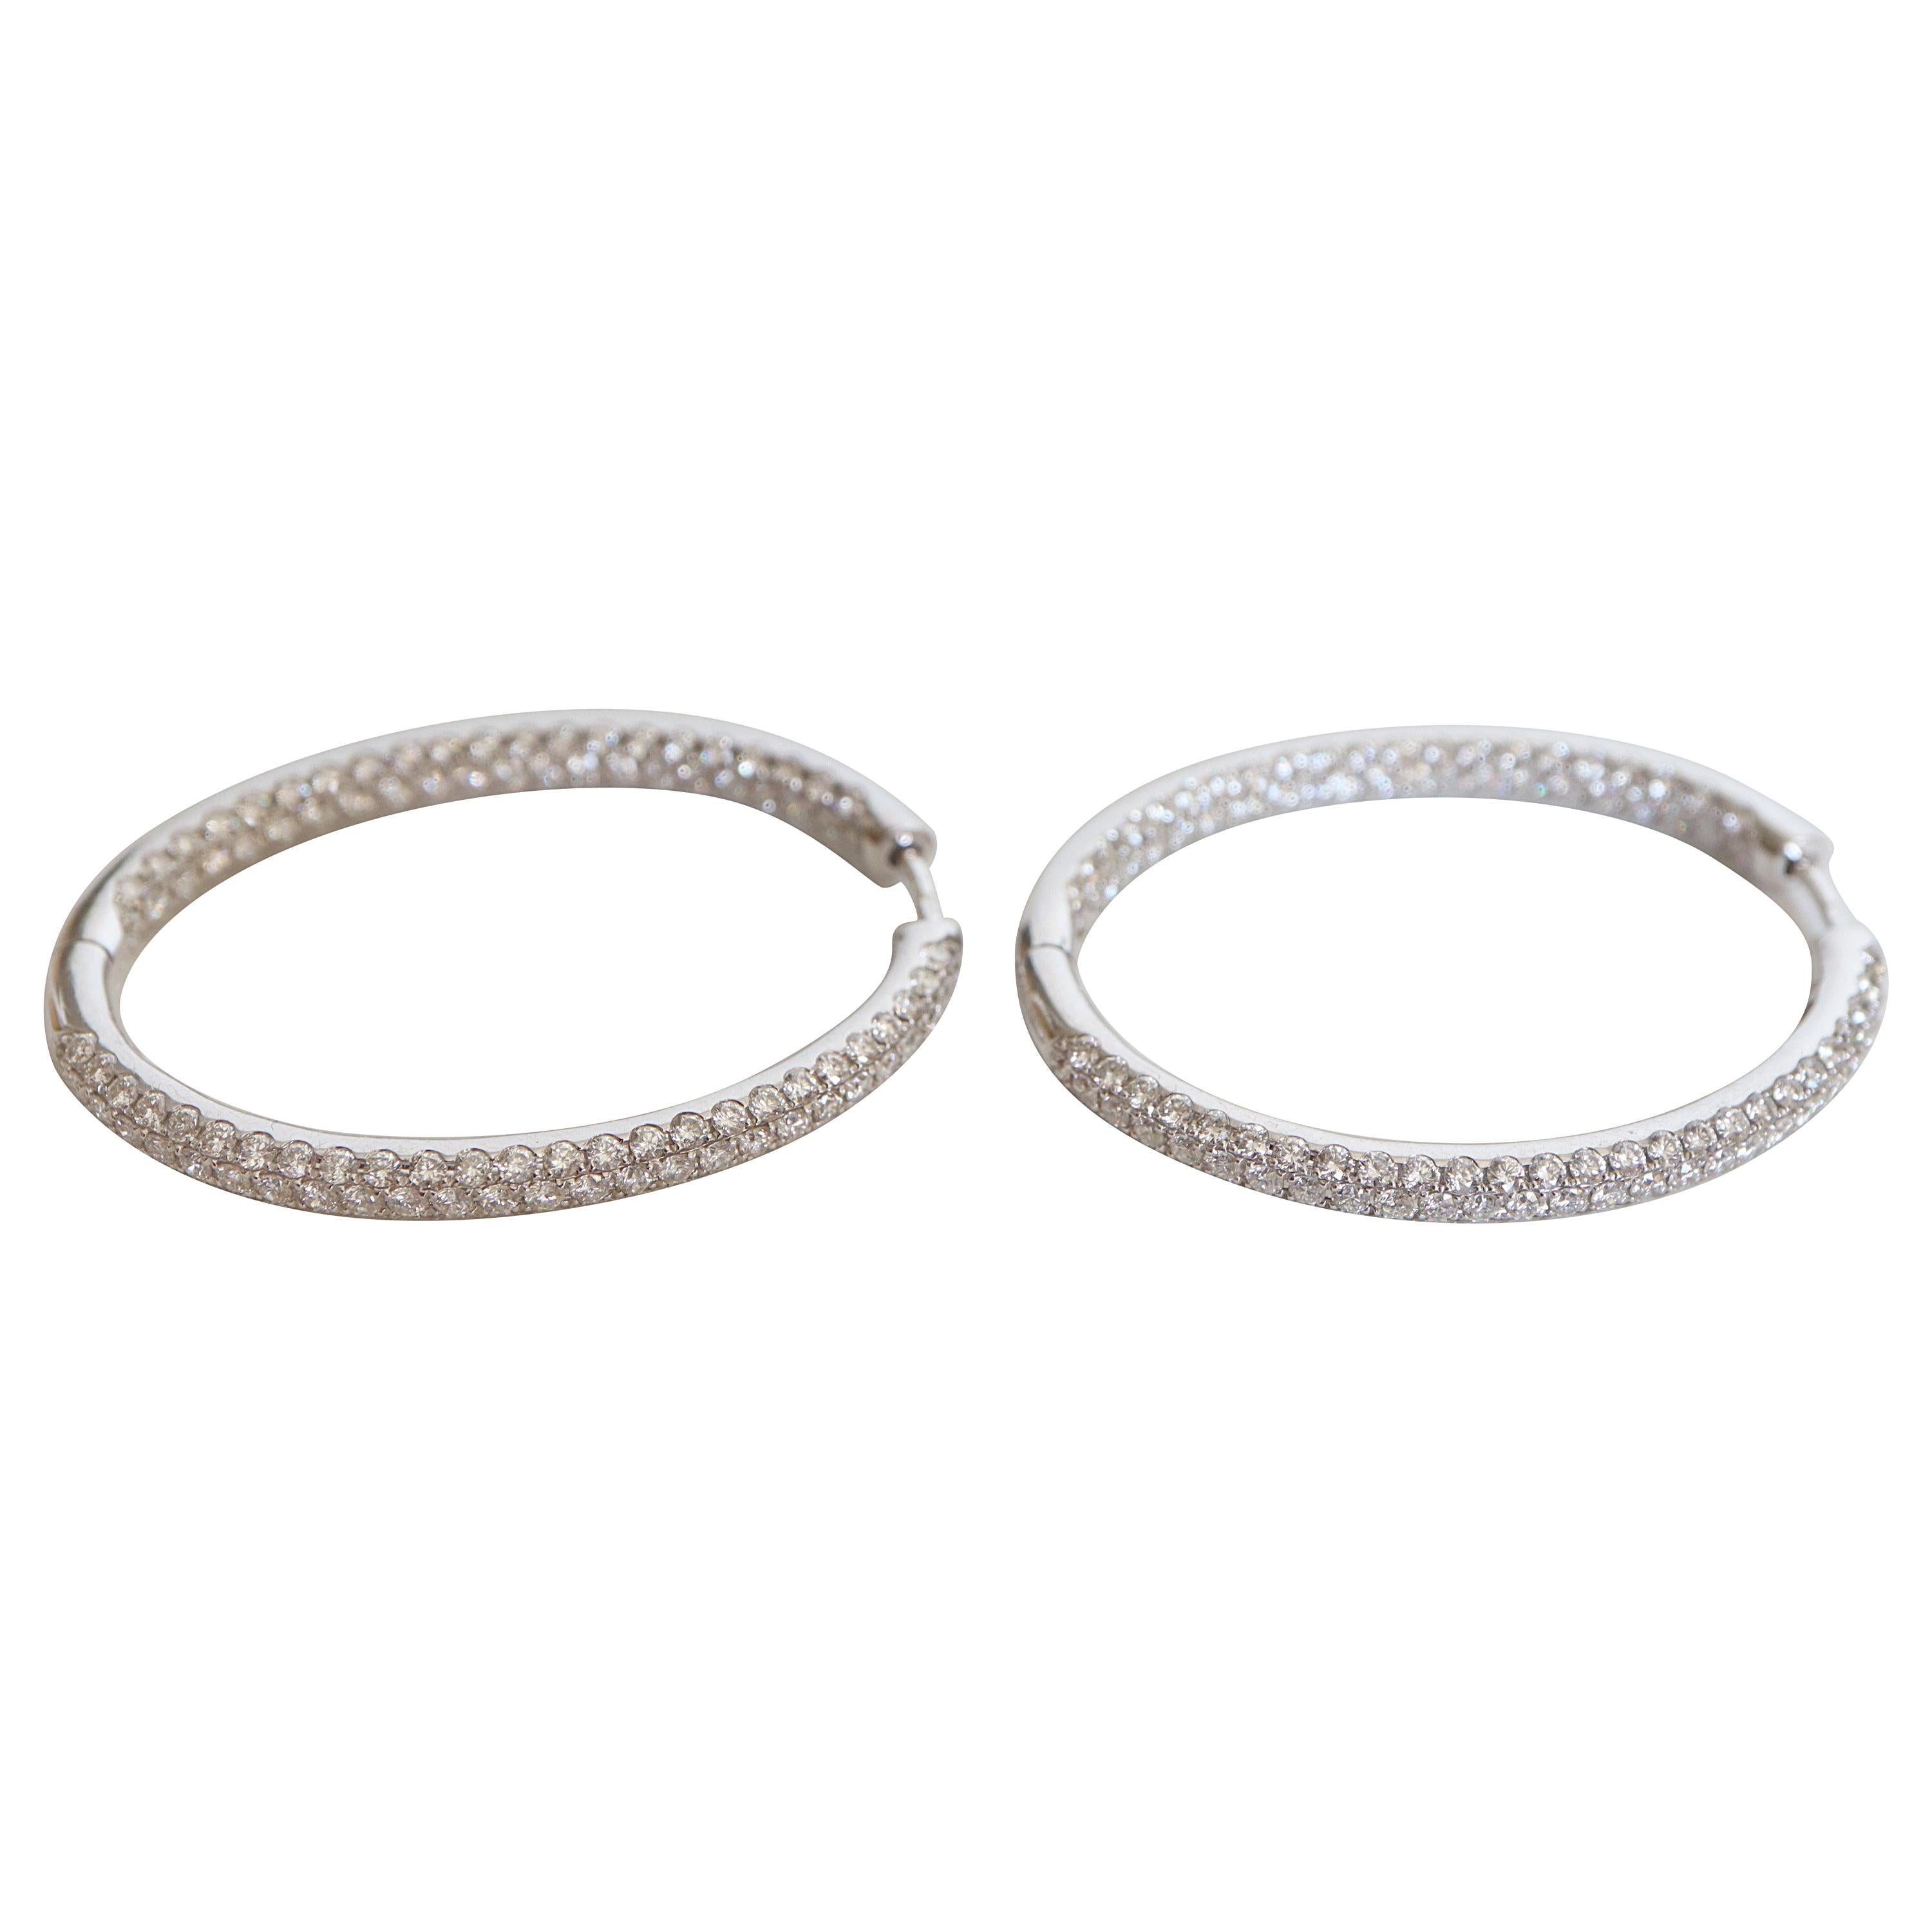 Oval Hoop Earrings in 18 Carat White Gold Set with 4 Carat of Diamonds